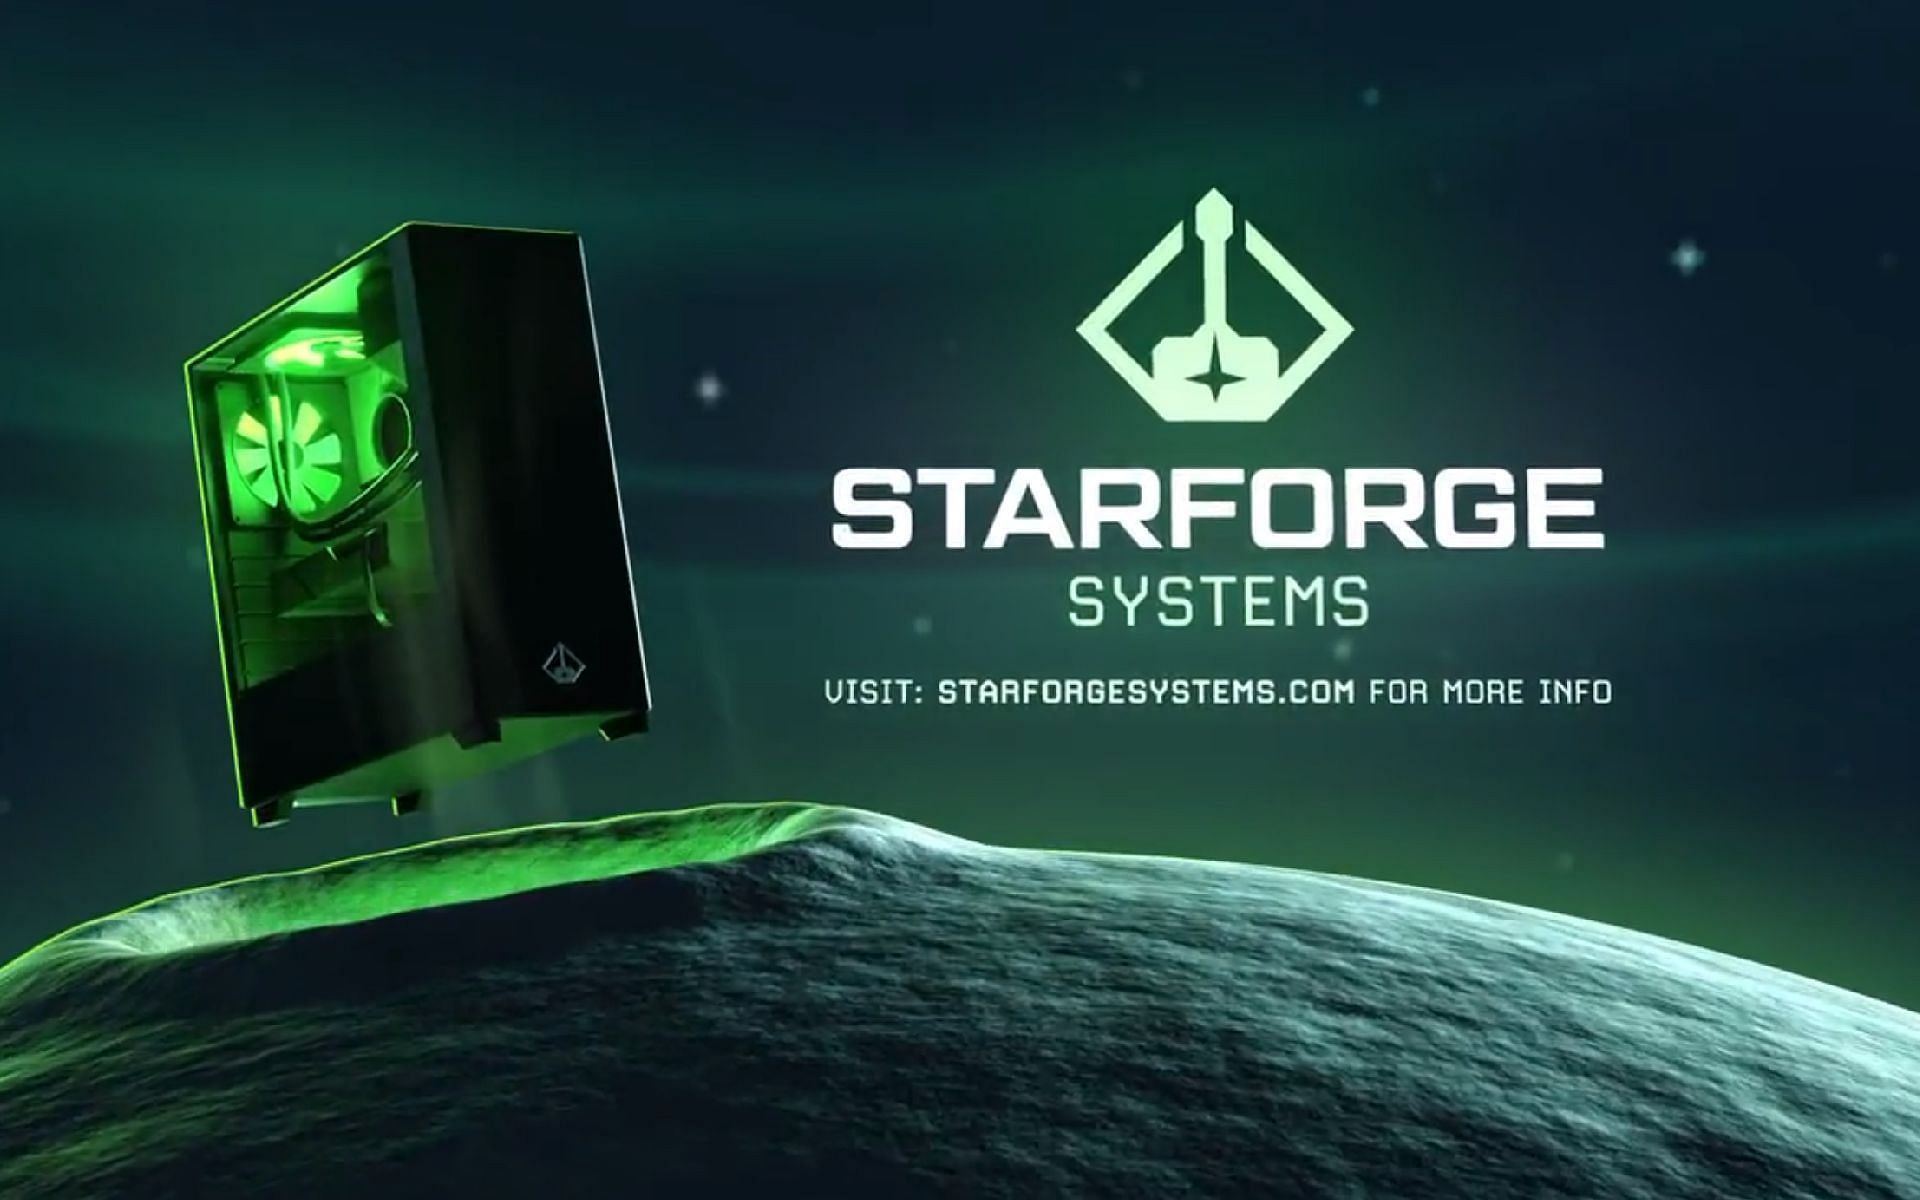 Starforge Systems is a new PC building initiative from OTK and MoistCr1TiKaL (Image via OTKNetwork/Twitter)